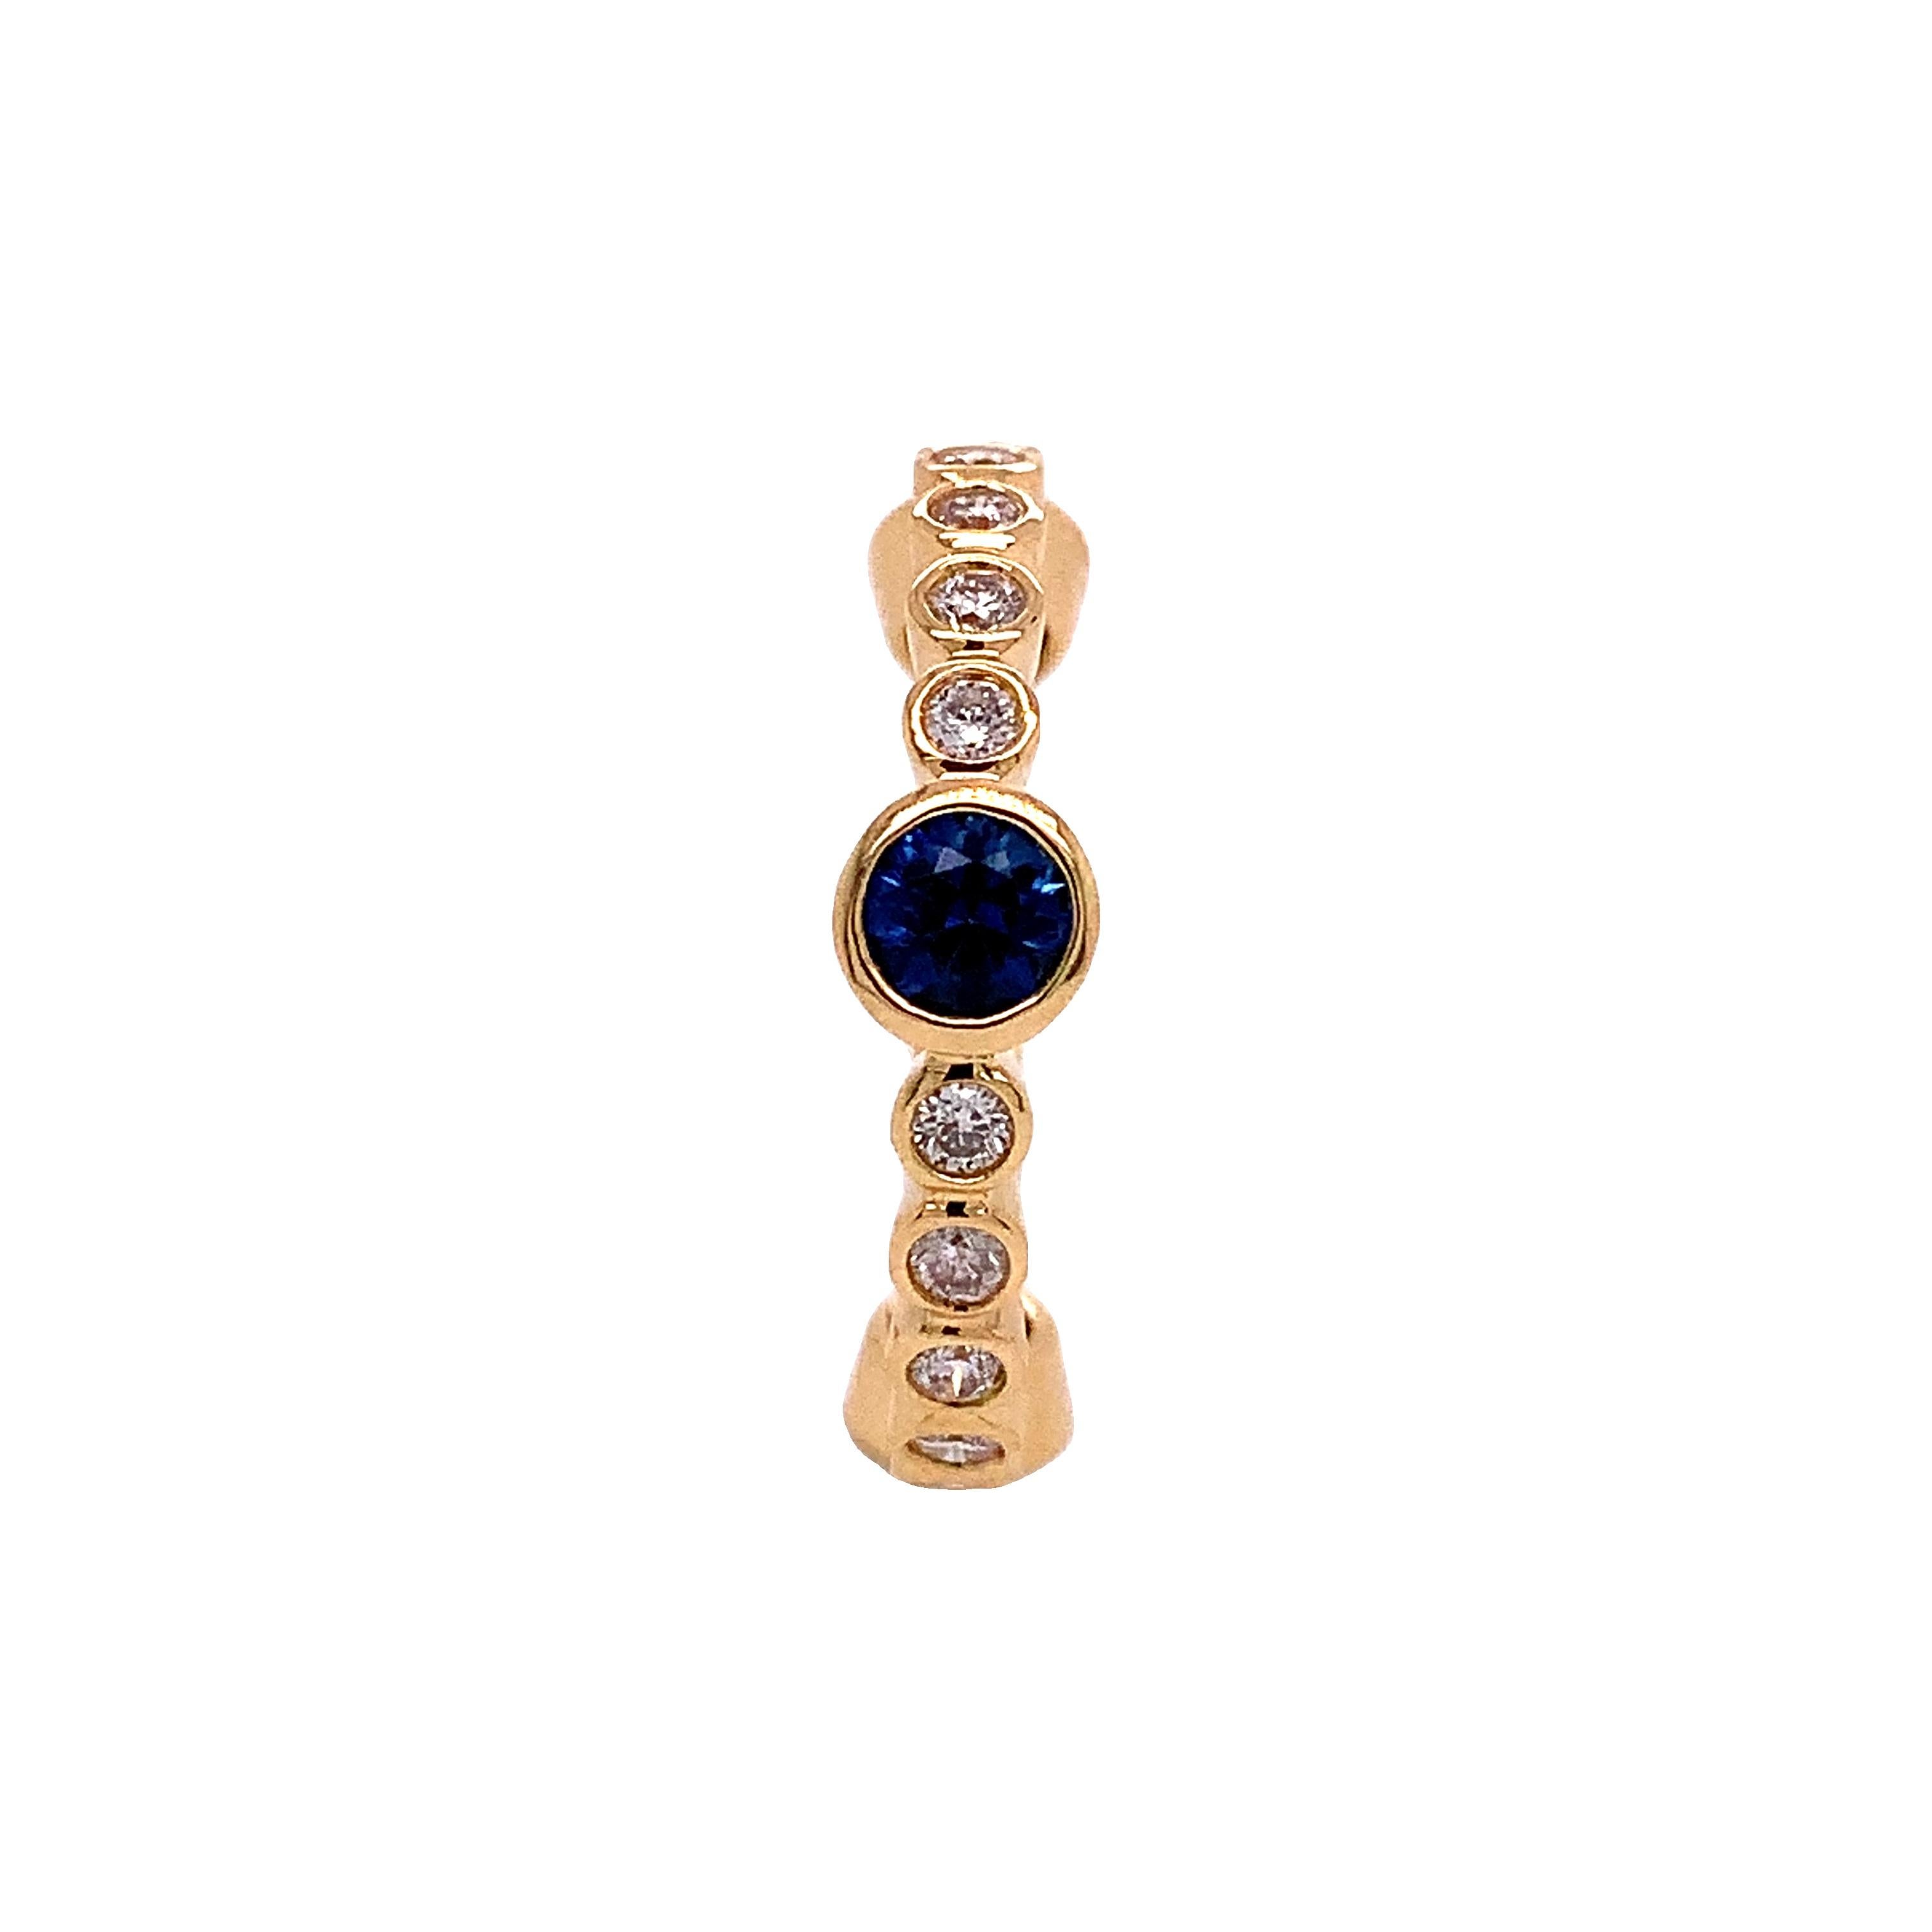 18K Yellow Gold
Blue Sapphire: 0.88ct total weight
Diamond: 0.48ct total weight
All diamonds are G-H/ SI stones.